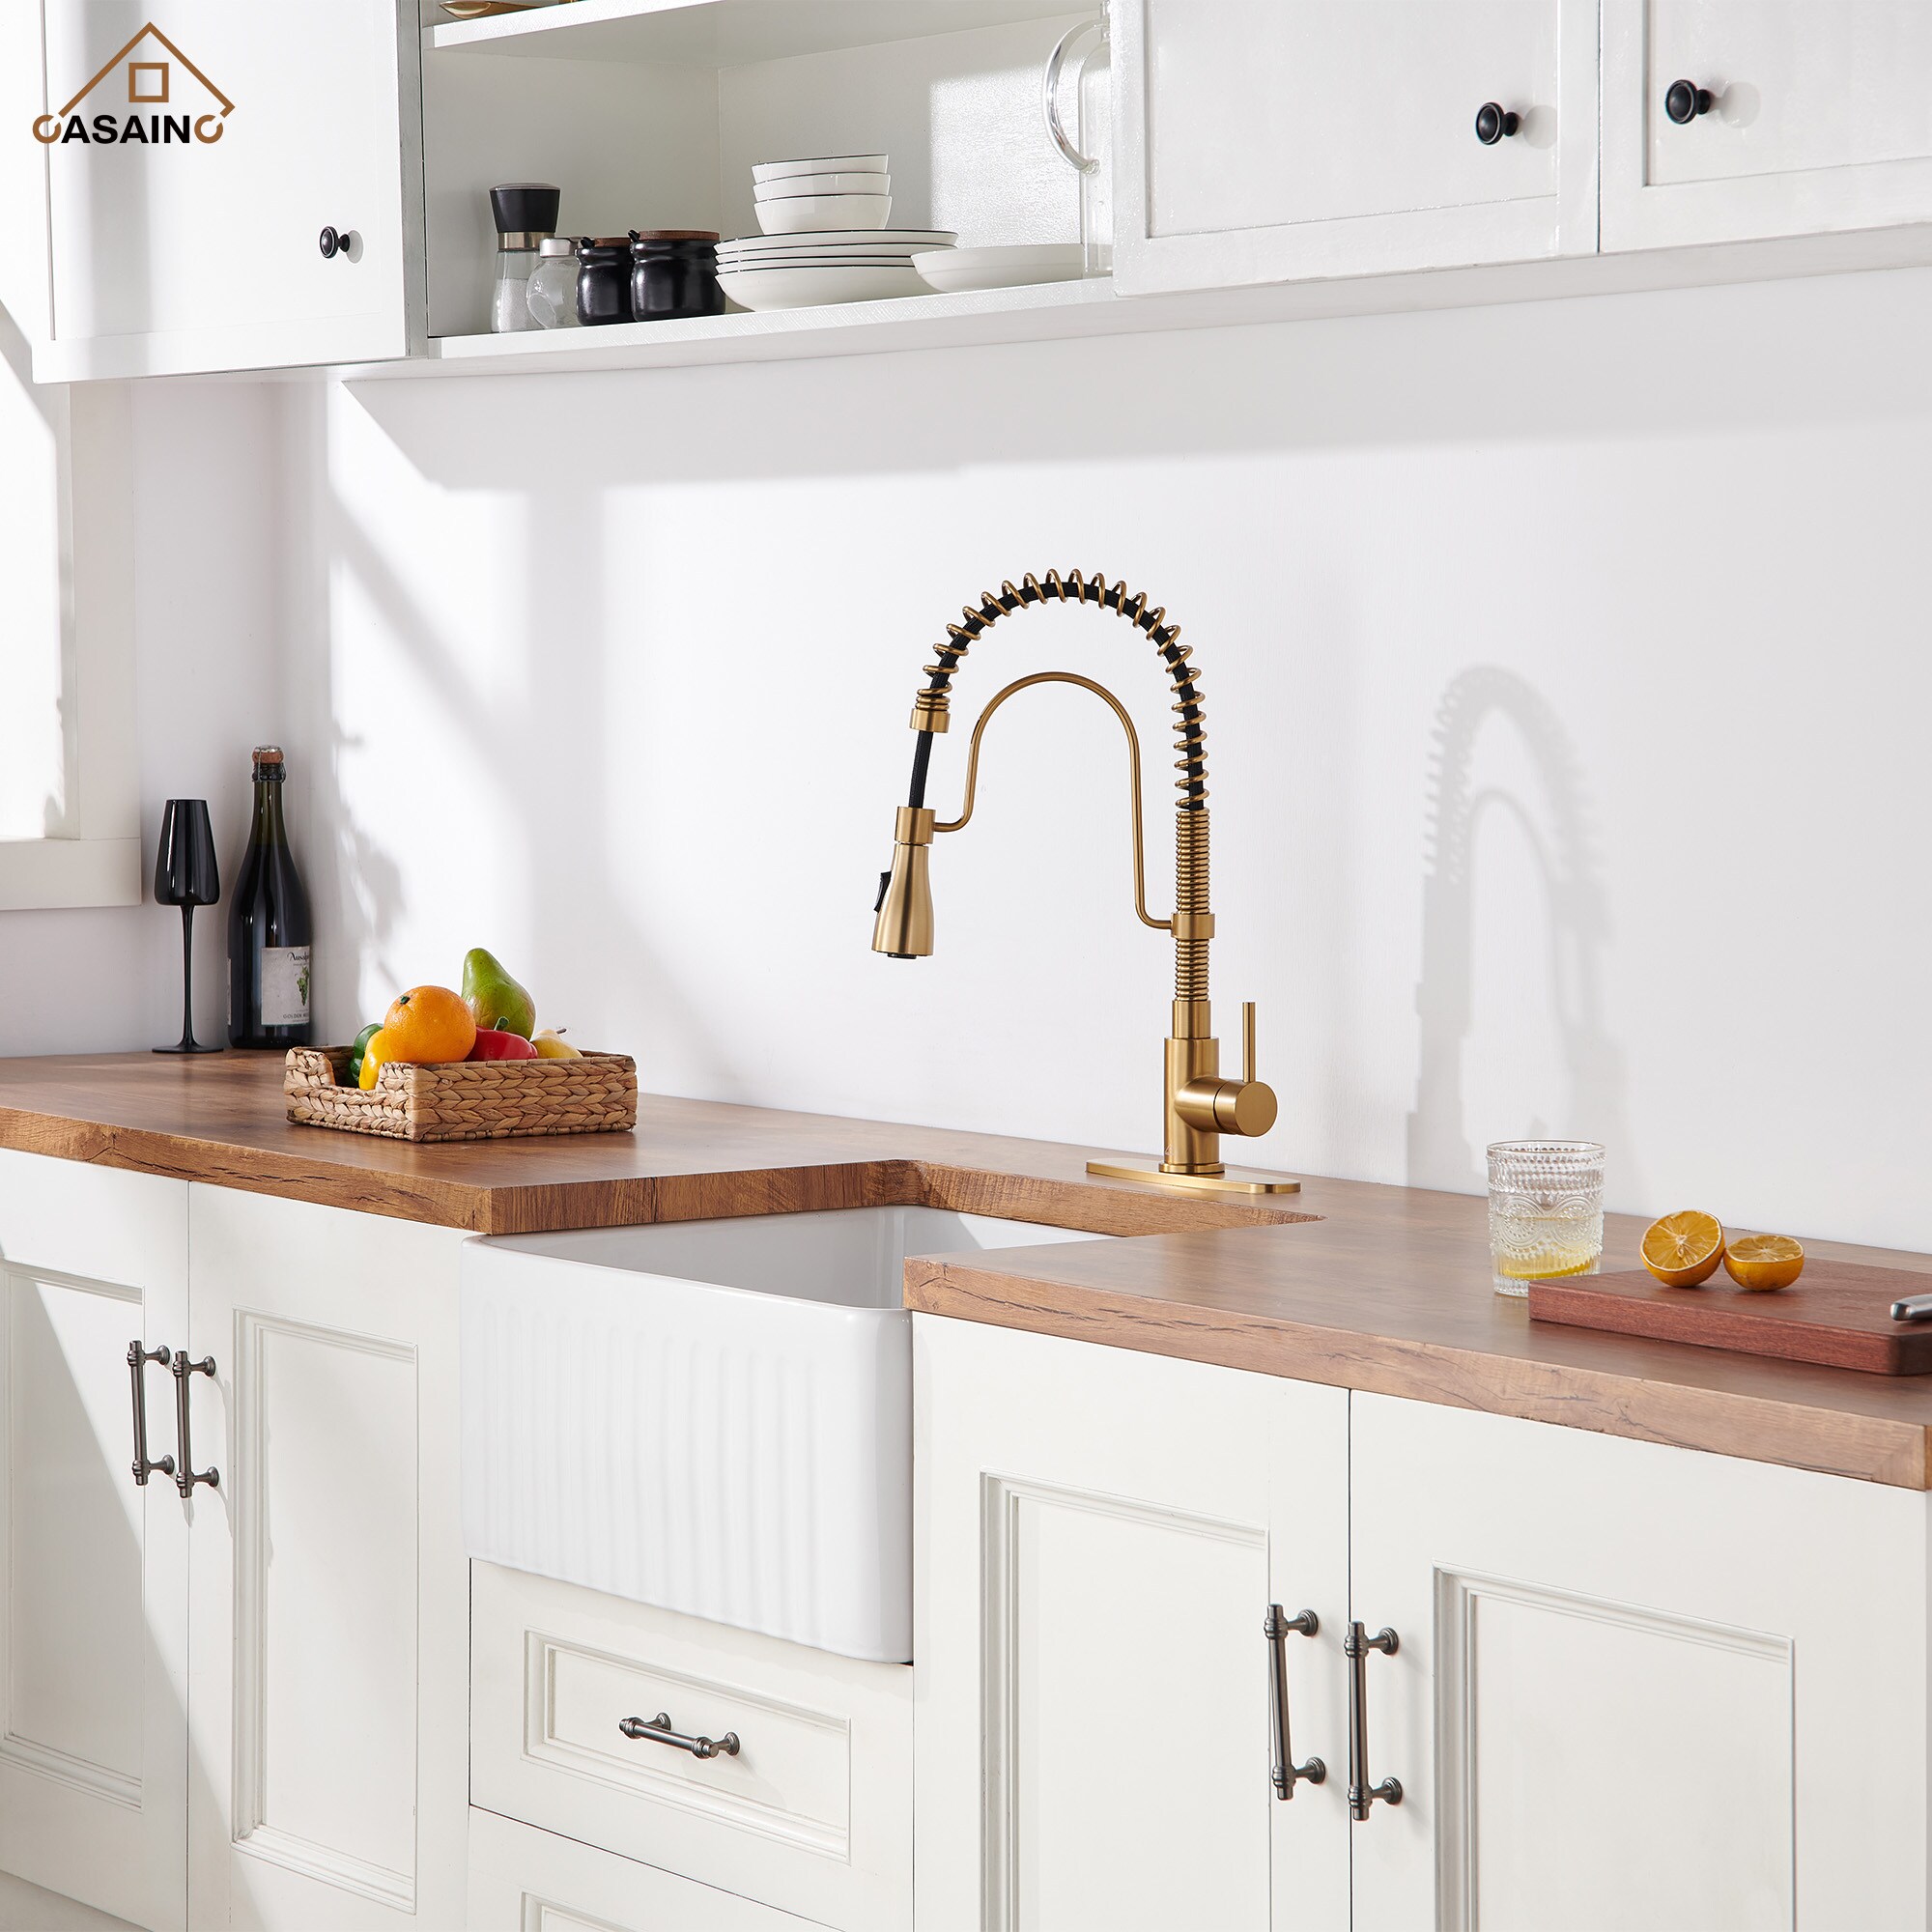 CASAINC Brushed Gold Single Handle Pull-out Kitchen Faucet with Deck ...